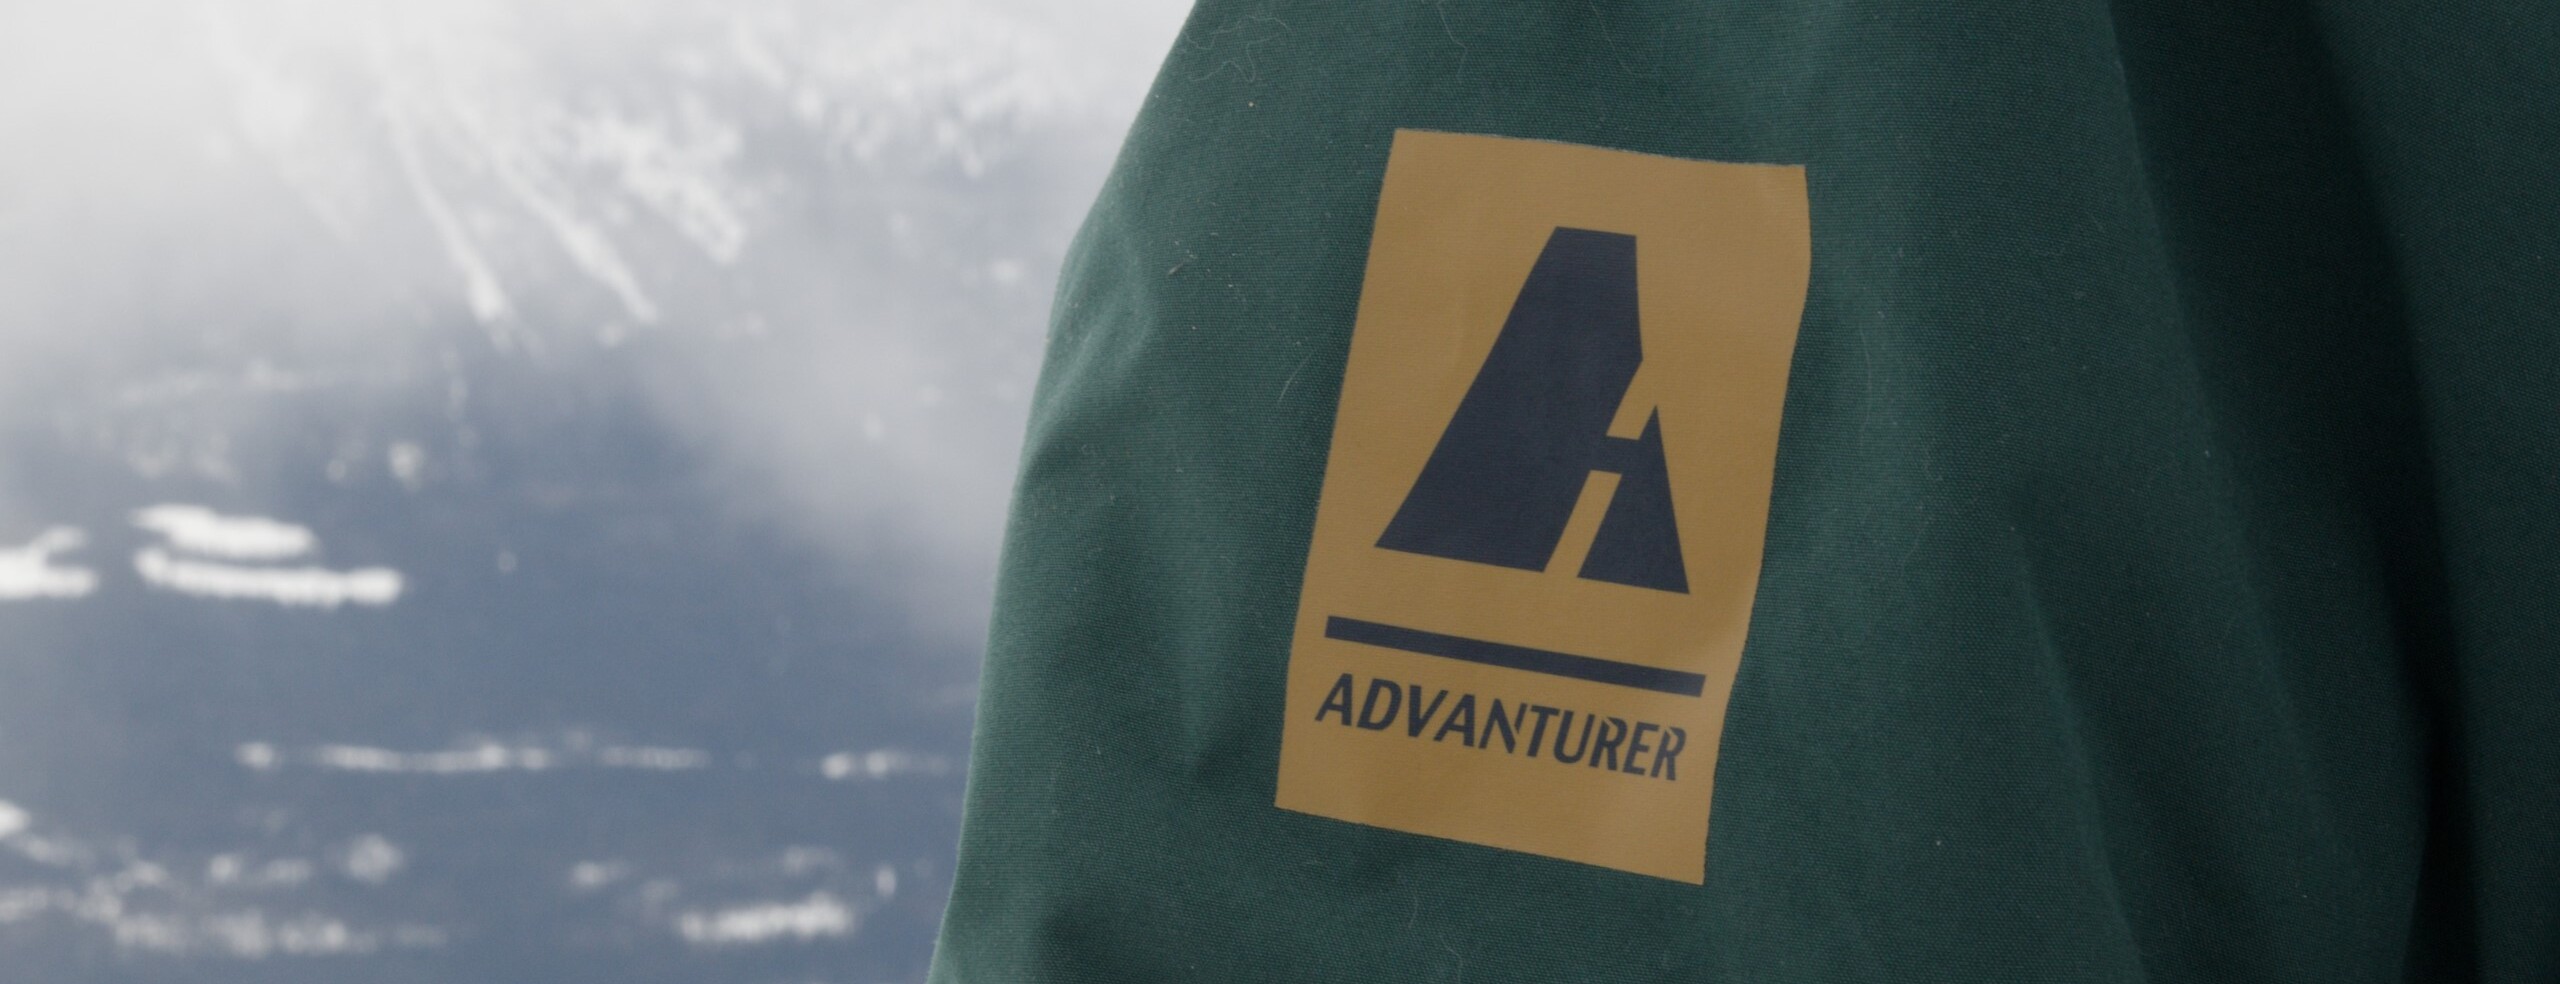 advanturer logo with mountain in background